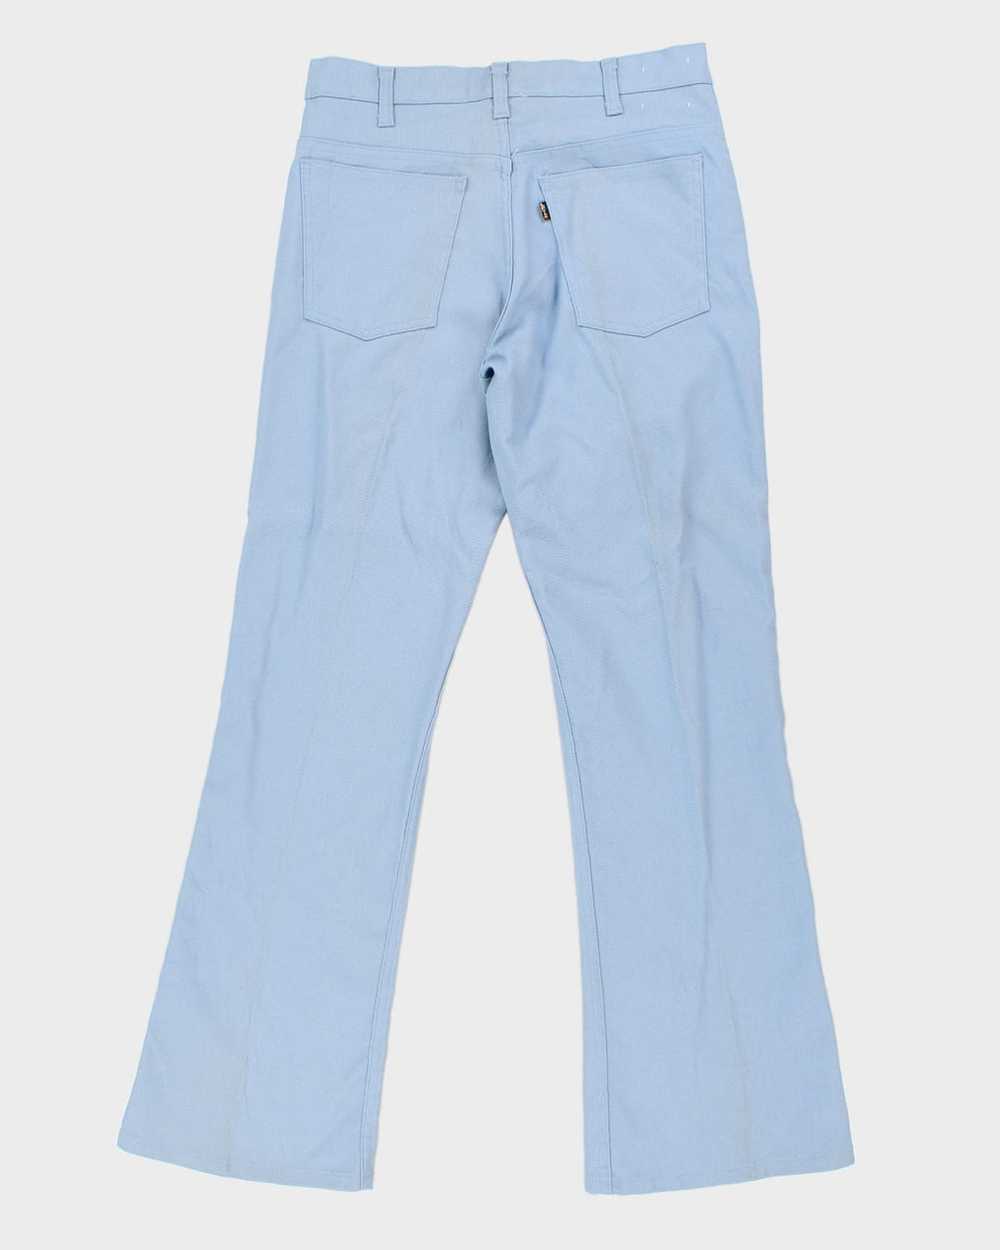 Vintage 70's Levi's Blue Creased Trousers - W31 - image 2